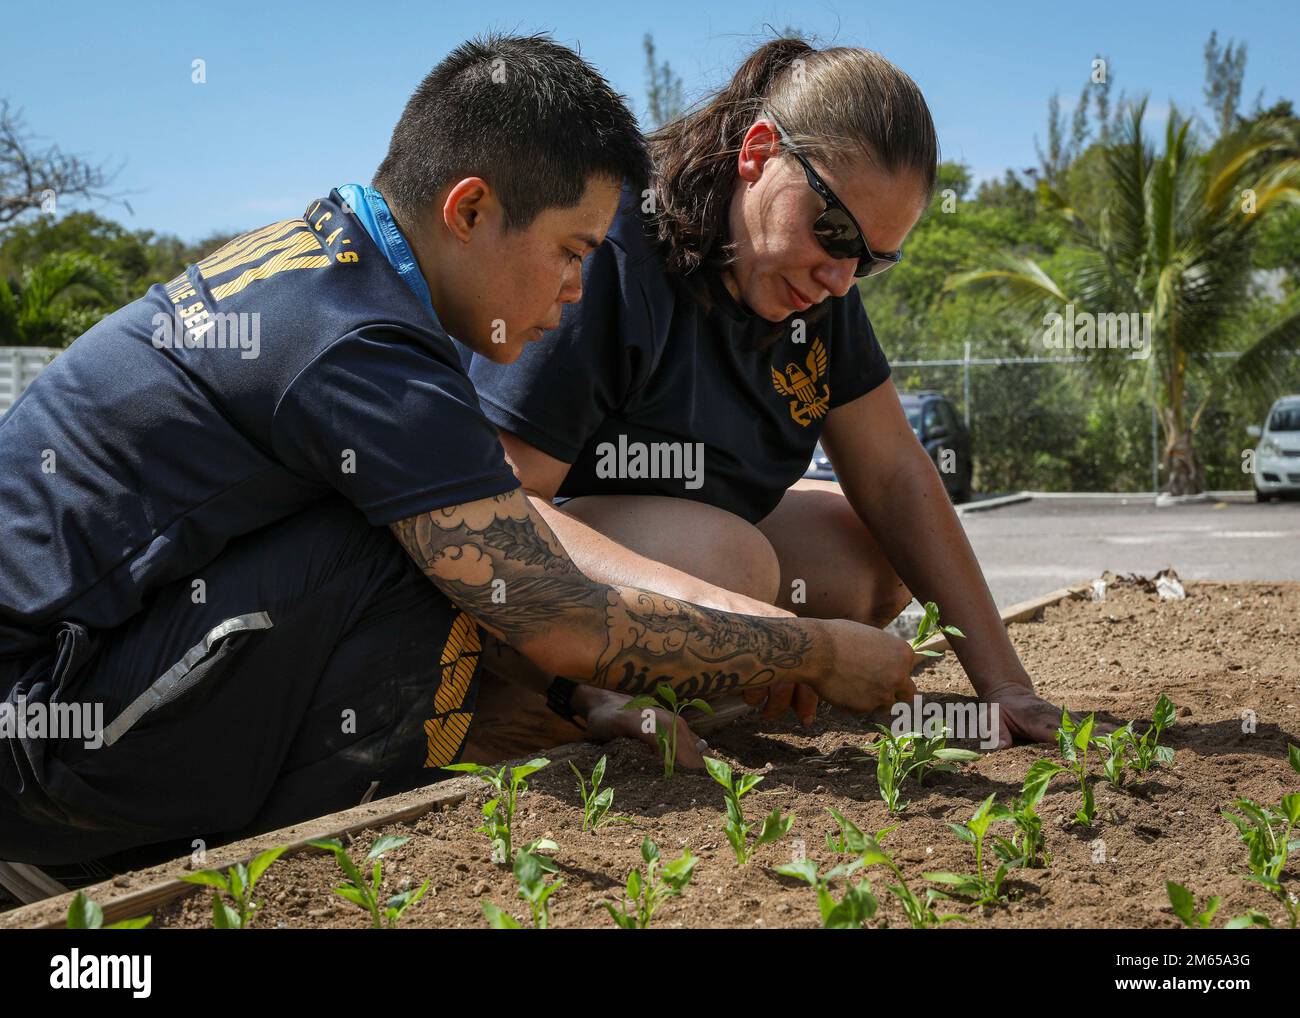 NASSAU, The Bahamas (April 3, 2022) – Chief Gas Turbine System Technician (Electrician) Jandavy Eseque, left, and Intelligence Specialist 1st Class Heather Wessel, assigned to the Arleigh Burke-class guided-missile destroyer USS Porter (DDG 78) volunteer at The Bahamas Red Cross center to help plant vegetables for the Community Resilience and Food Security Pilot Program, April 3. Porter, forward-deployed to Rota, Spain, is currently in the U.S. 2nd Fleet area of operations to conduct routine certifications and training. Stock Photo